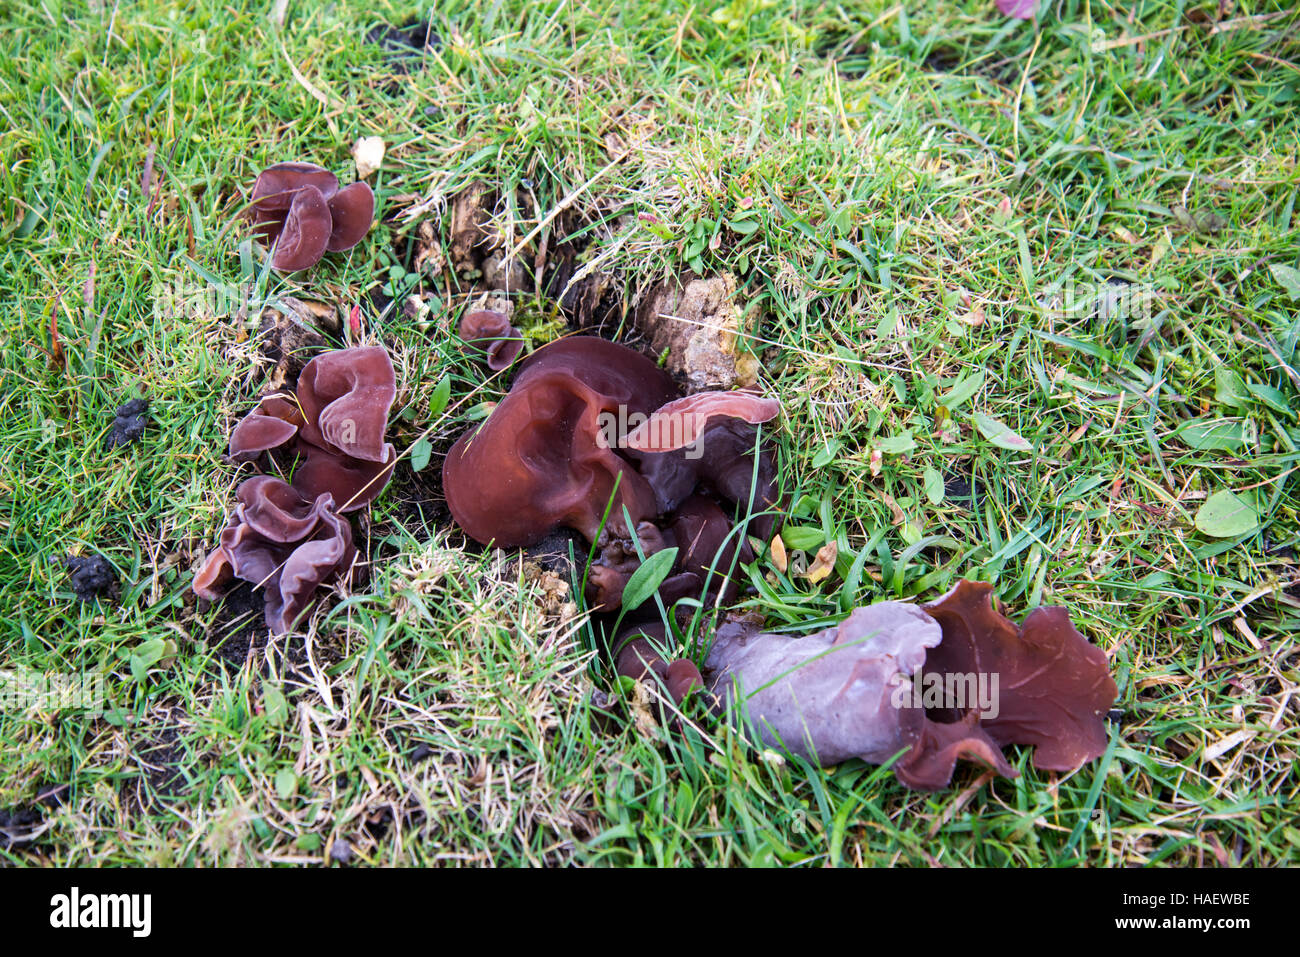 Fungus Auricularia auricula-judae, known as Judas's ear, Jew's ear or wood ear on remains of a tree stump in a grassy field. Stock Photo